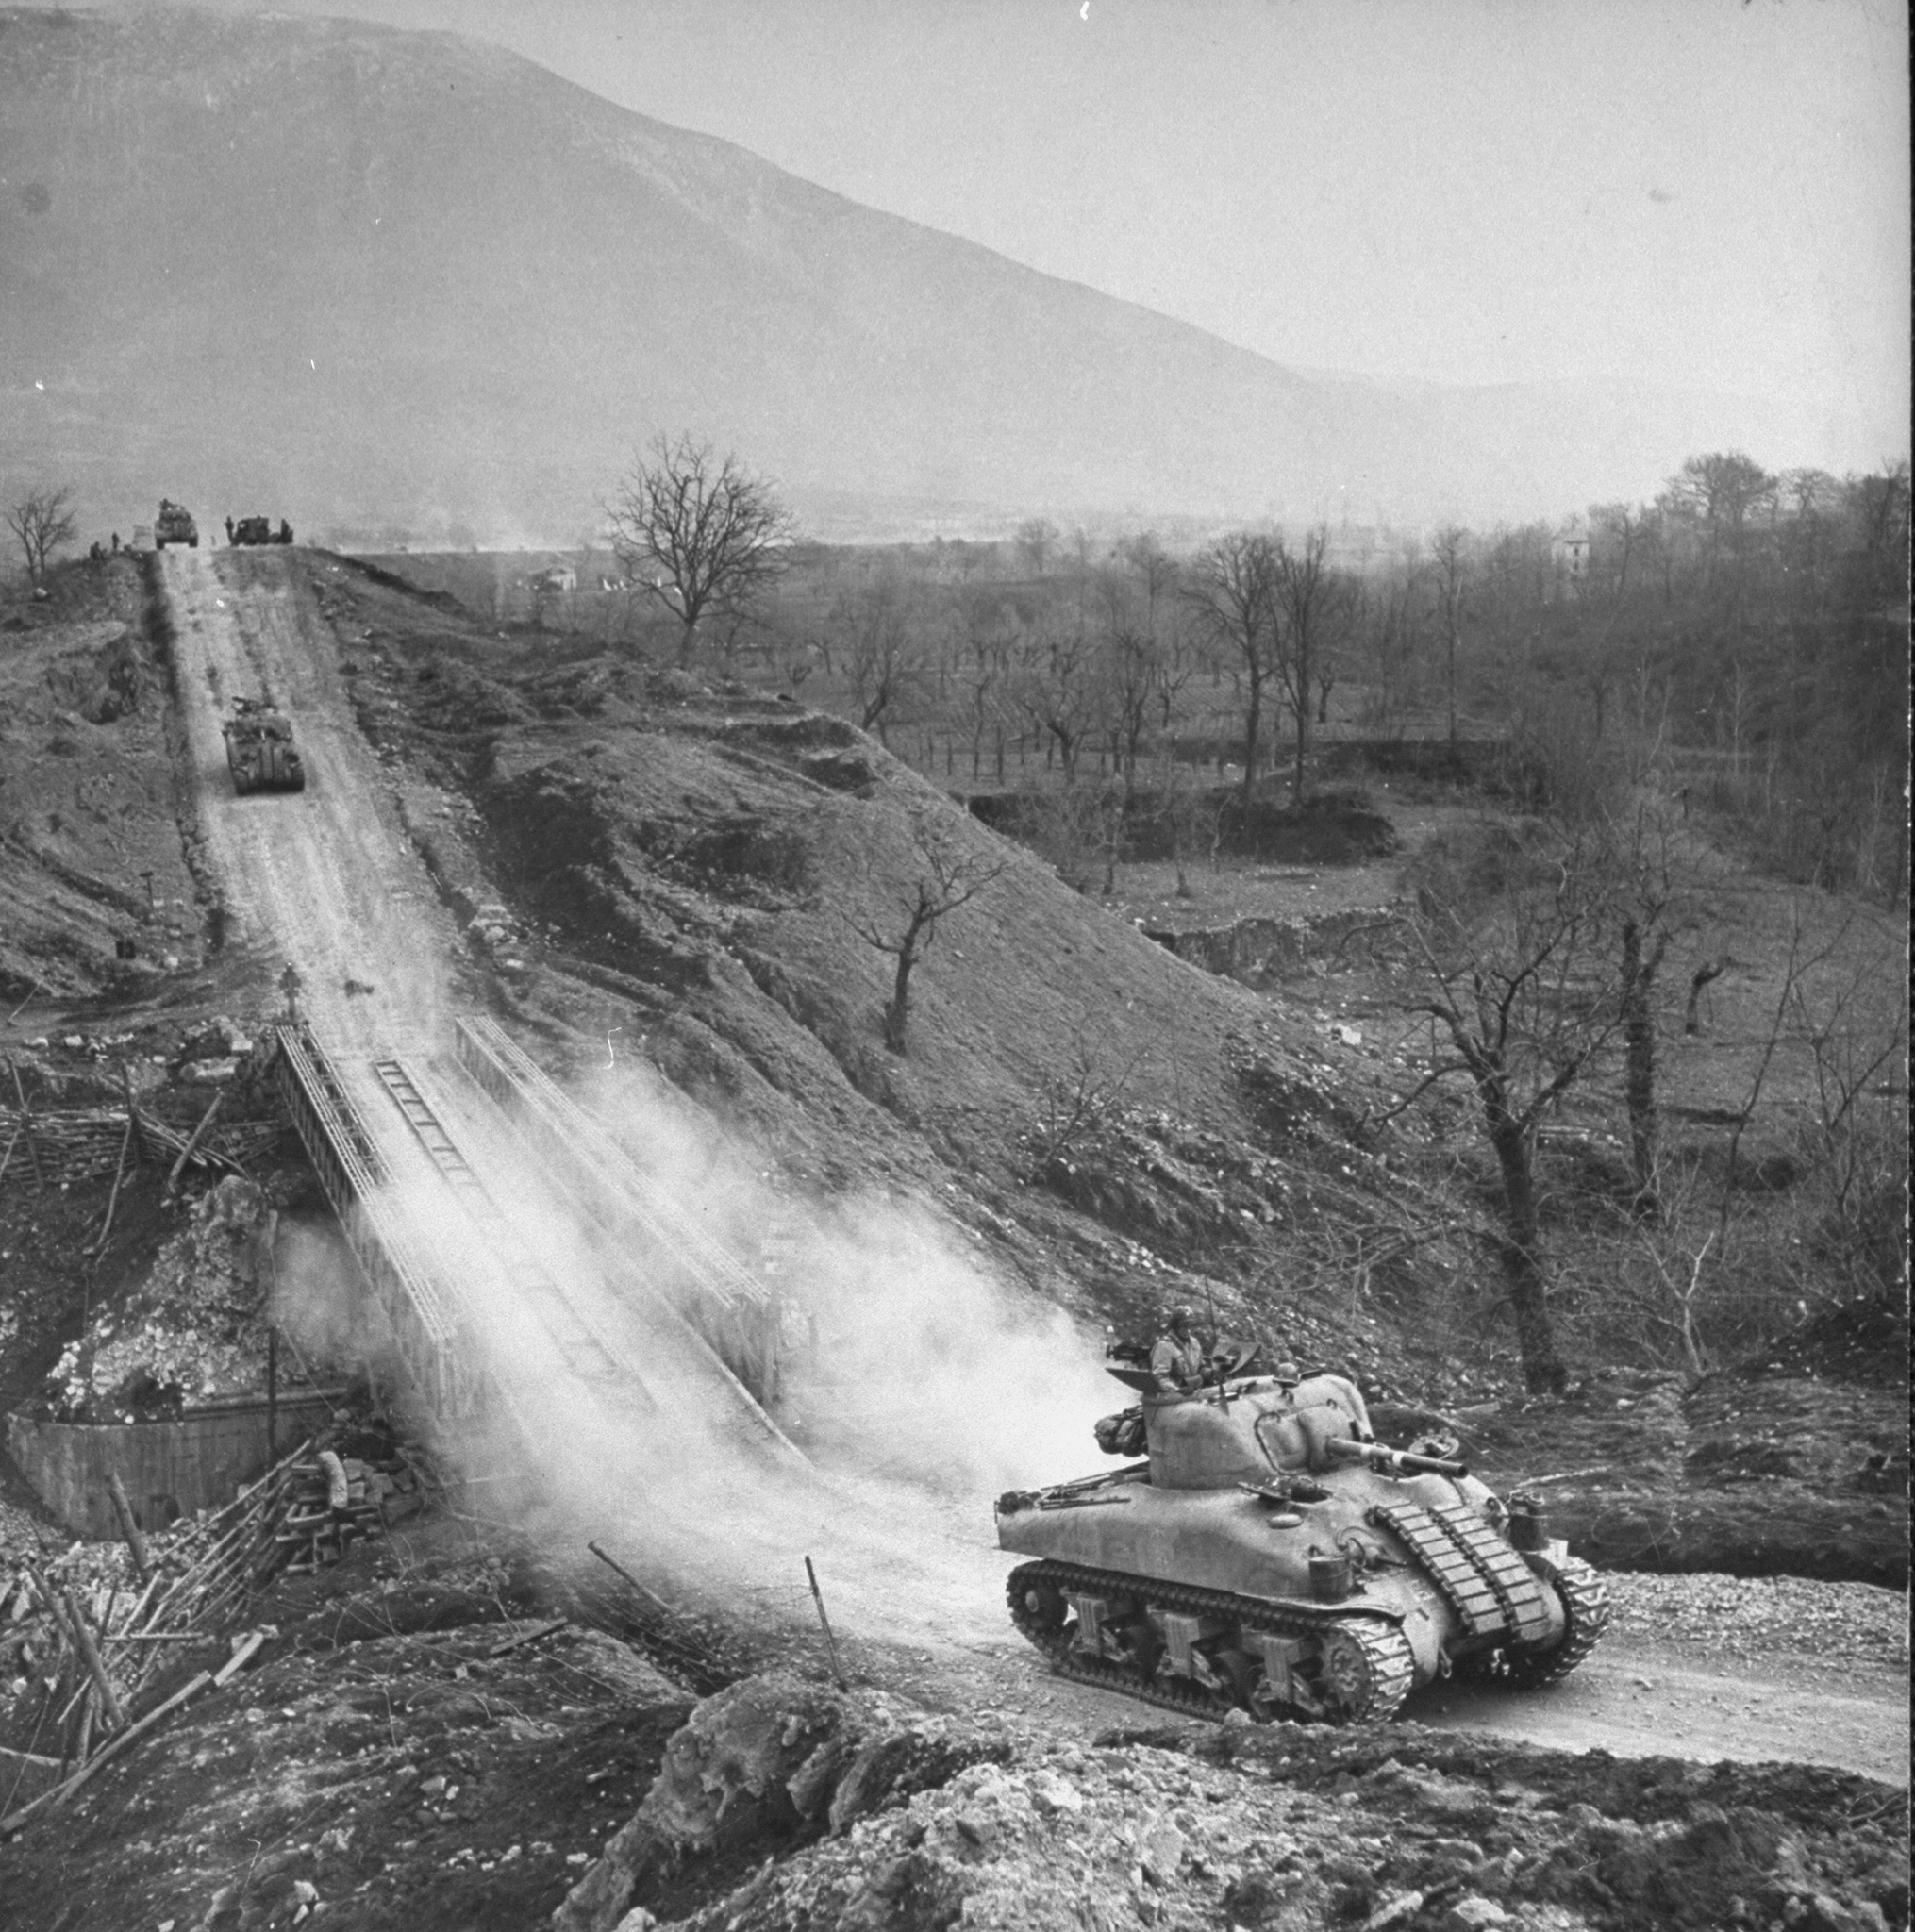 American M4 Sherman tanks rumble across an Allied-built bridge during the push to take the town of Cassino, Italy, 1944.